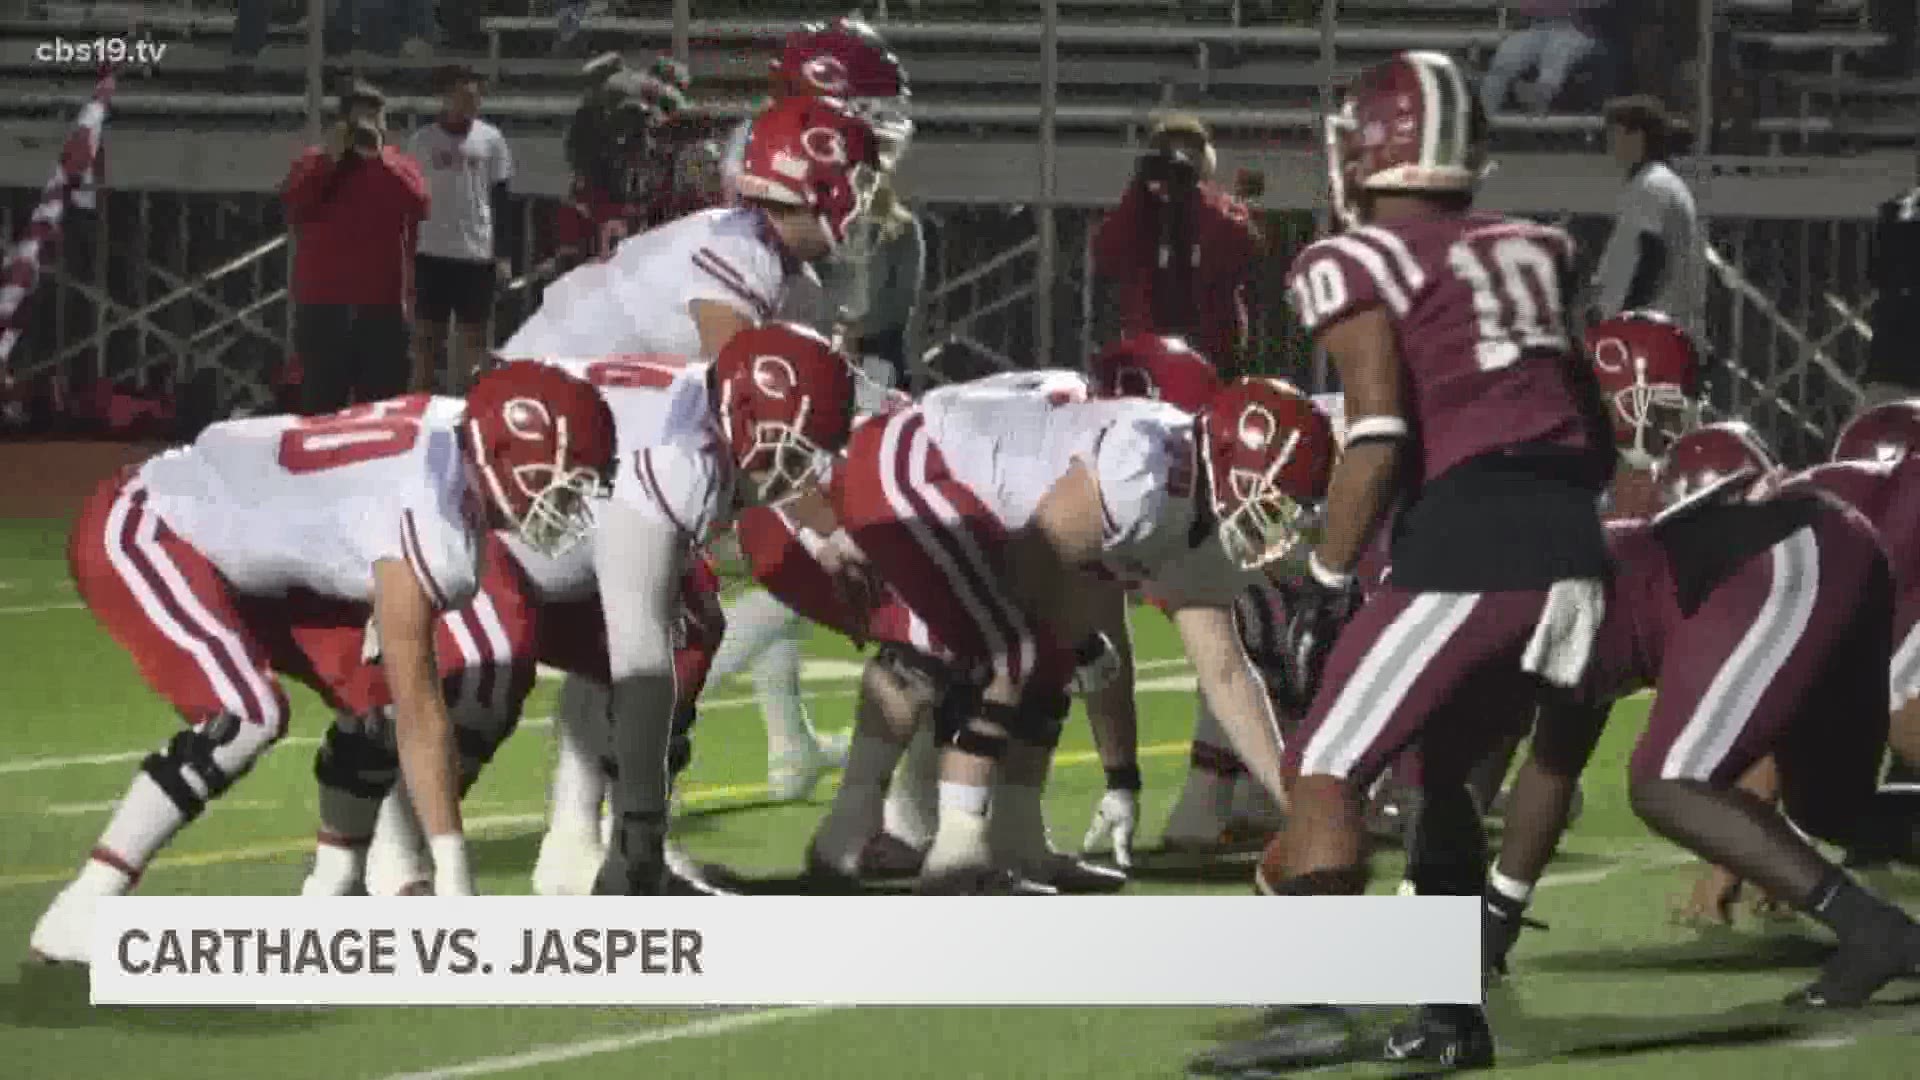 Carthage came away with the win, topping Jasper.